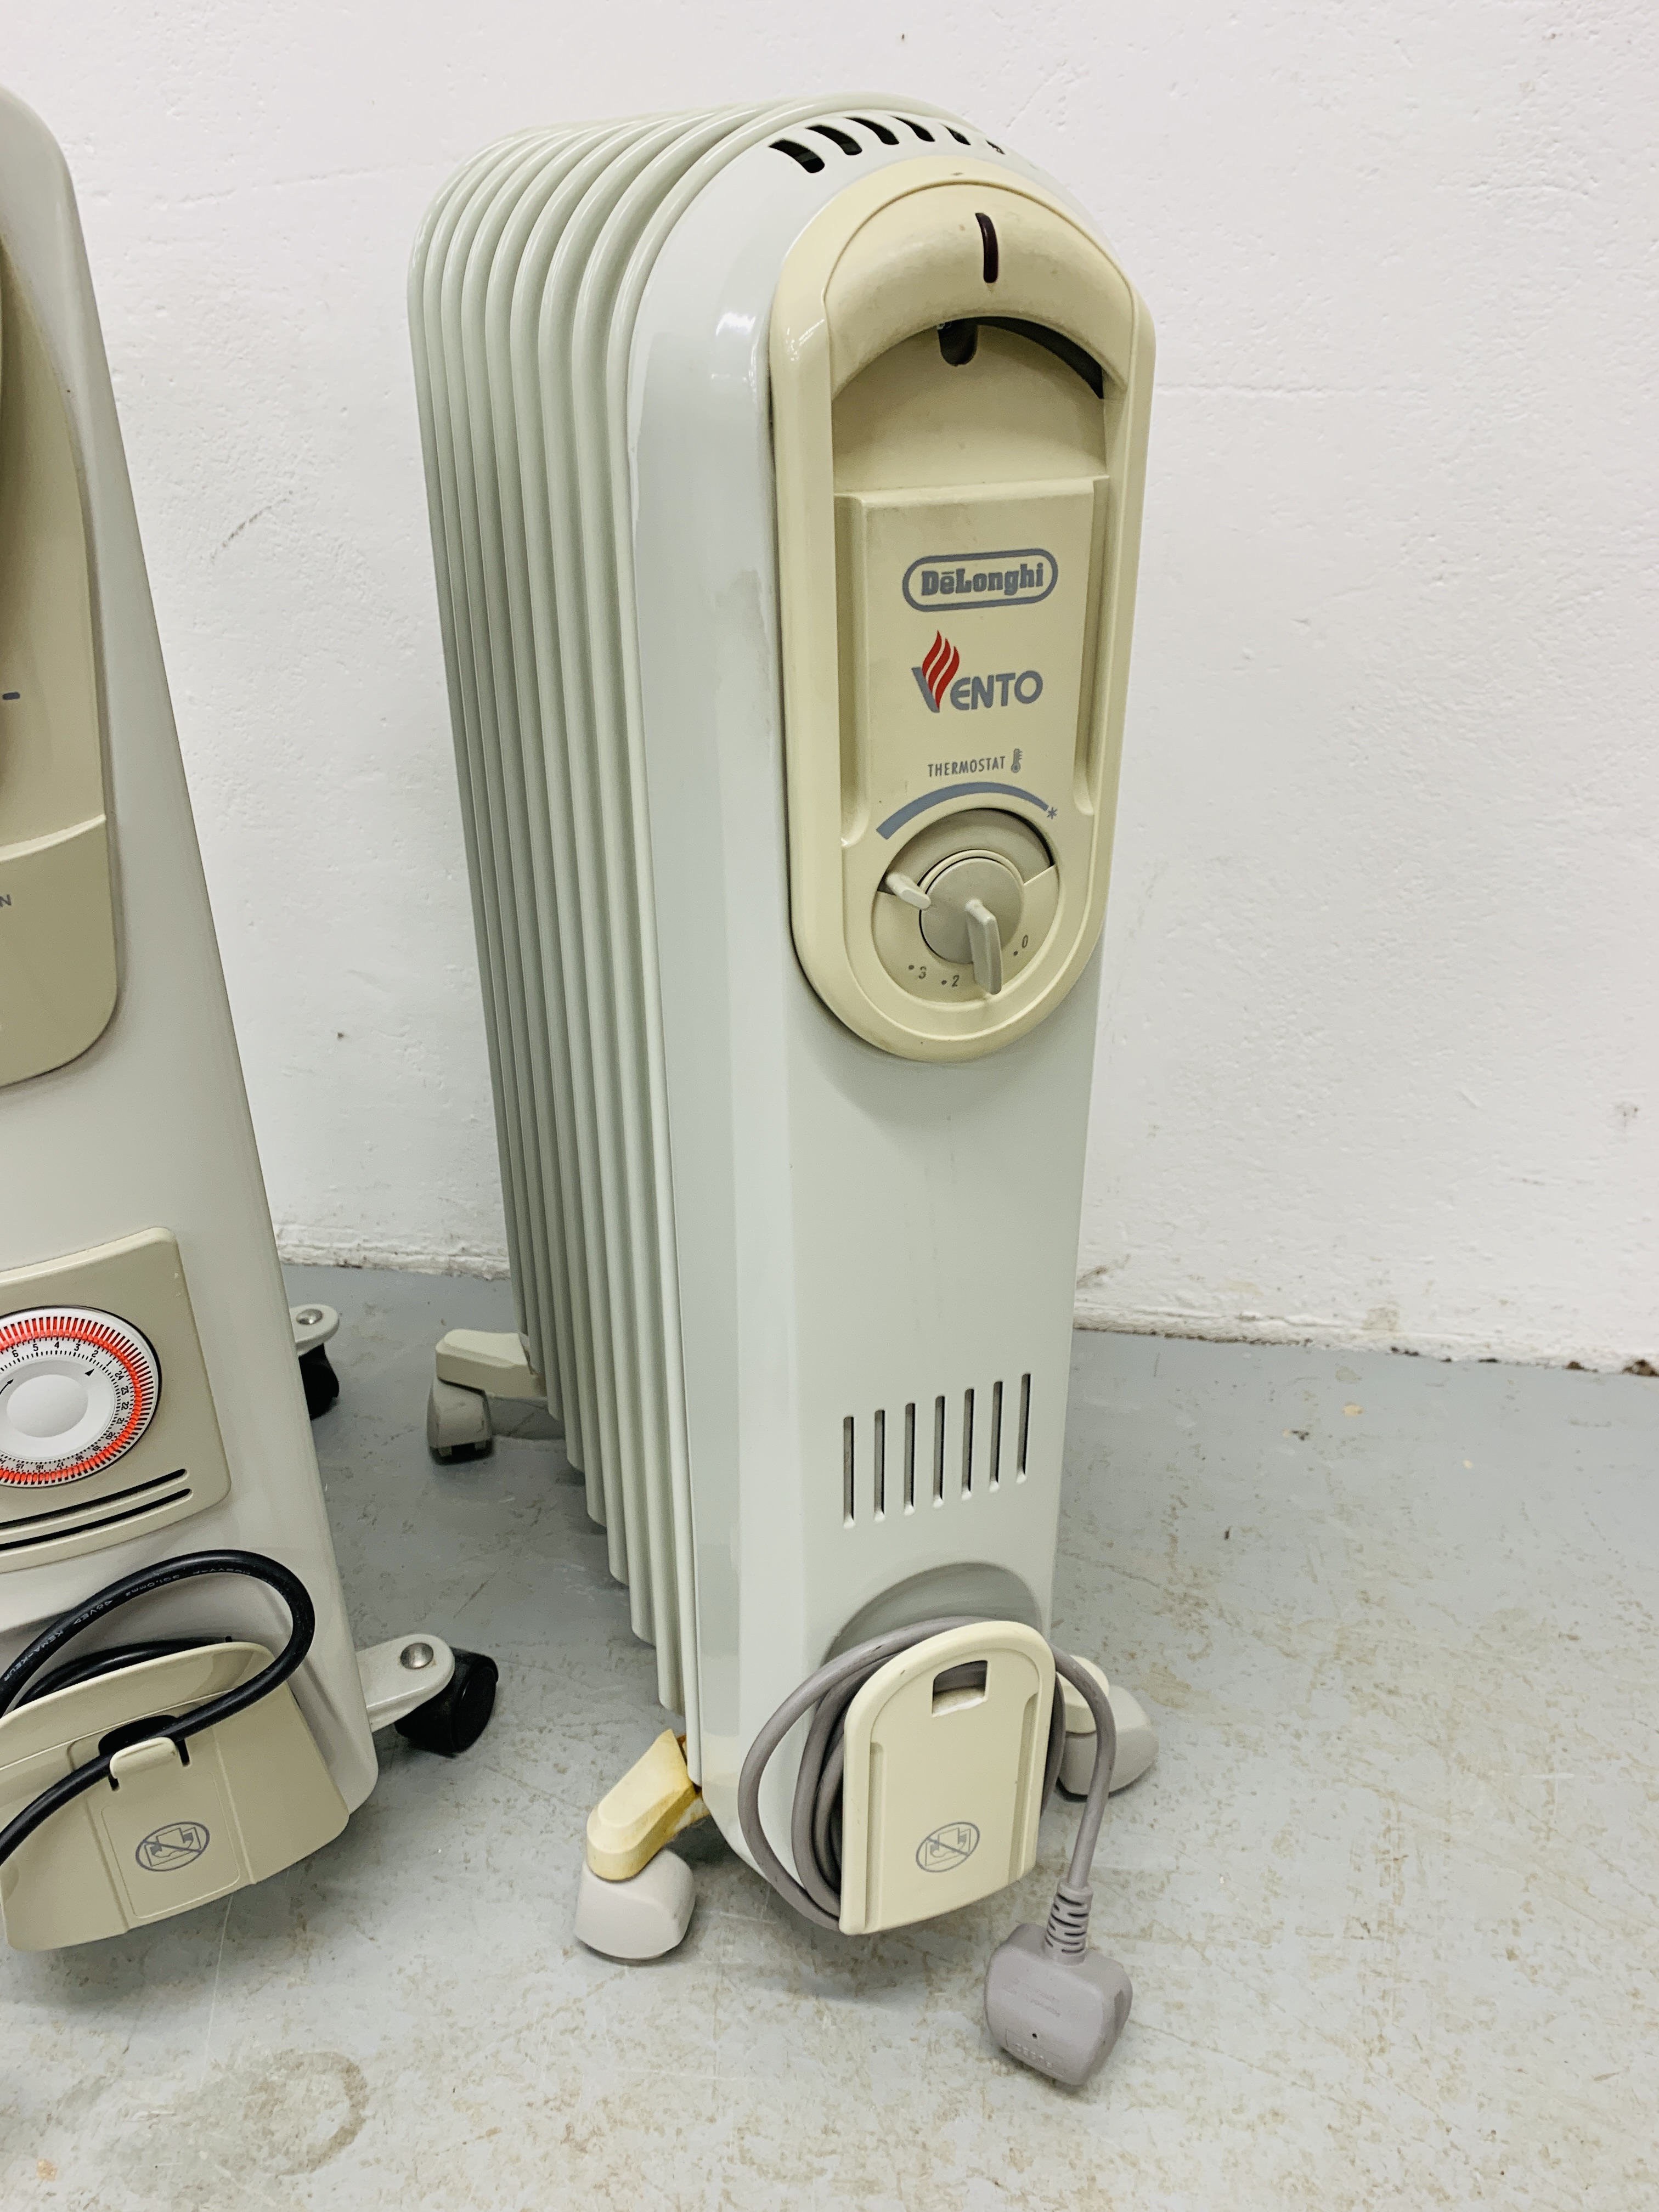 2 X DELONGHI ELECTRIC OIL FILLED RADIATORS (ONE WITH TIMER) - SOLD AS SEEN. - Image 3 of 4